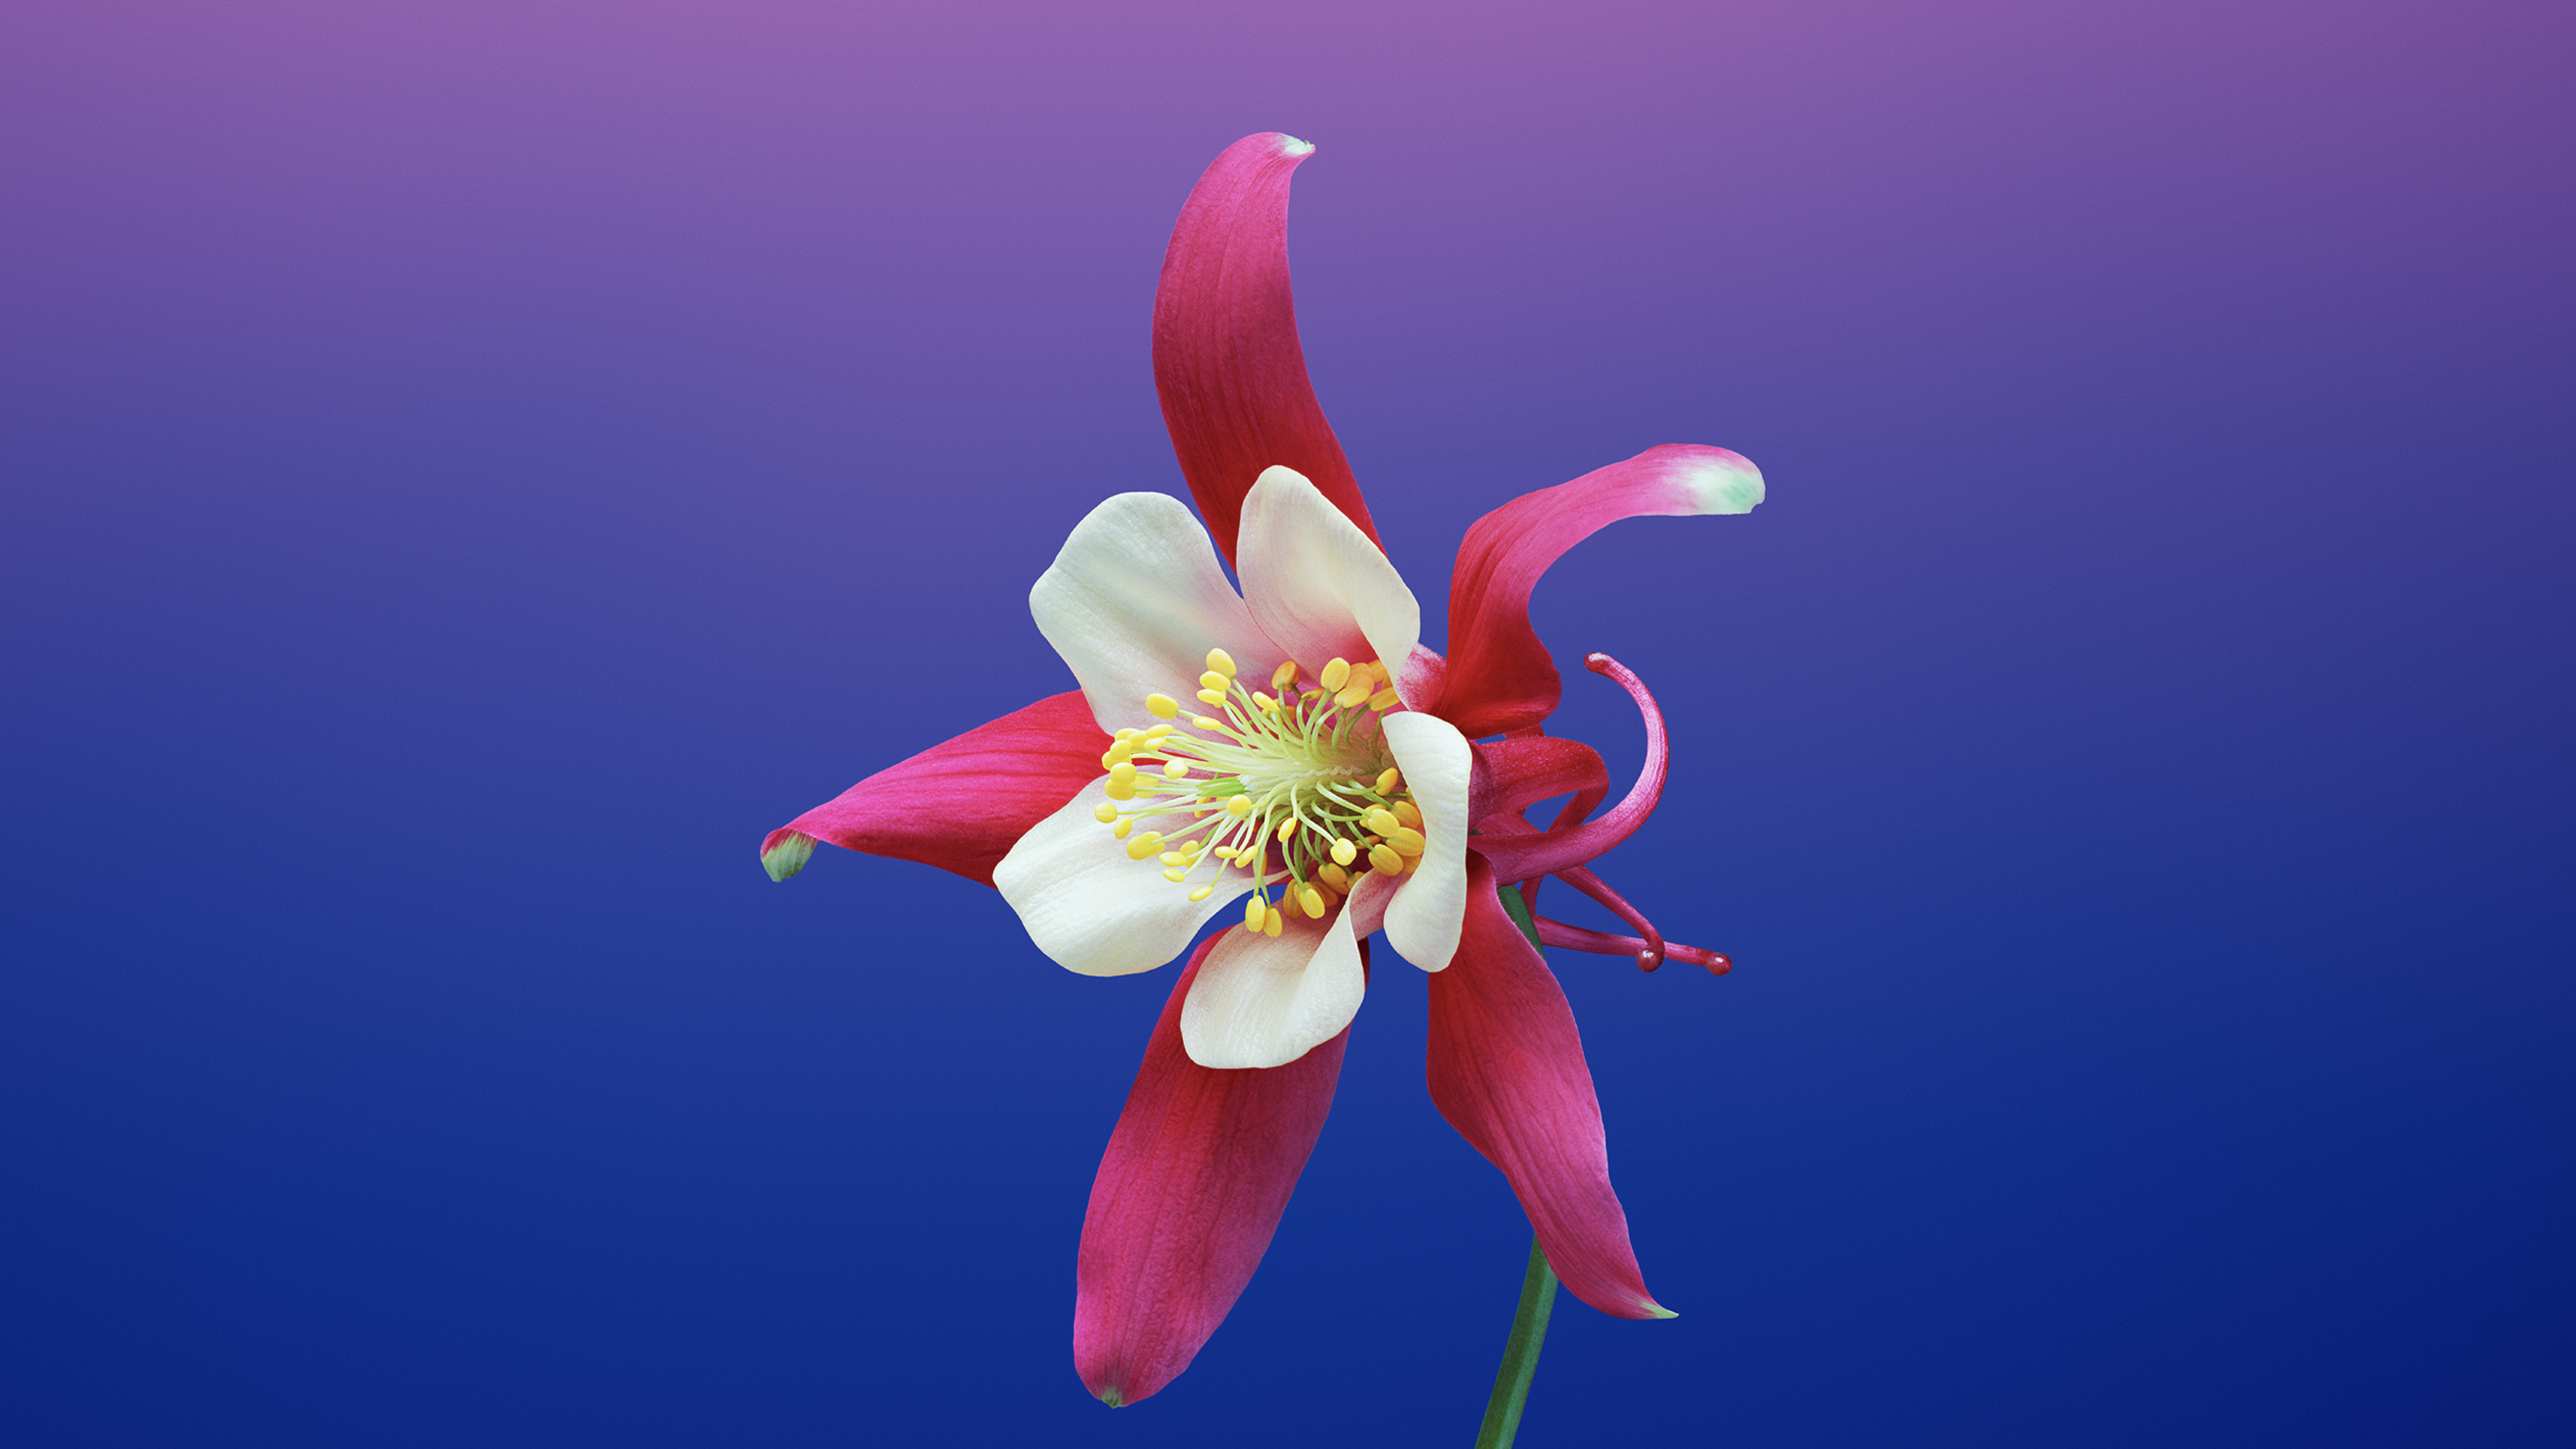 7680x4320 iOS 11 Flower Aquilegia 8K Wallpaper, HD Flowers 4K Wallpapers,  Images, Photos and Background - Wallpapers Den